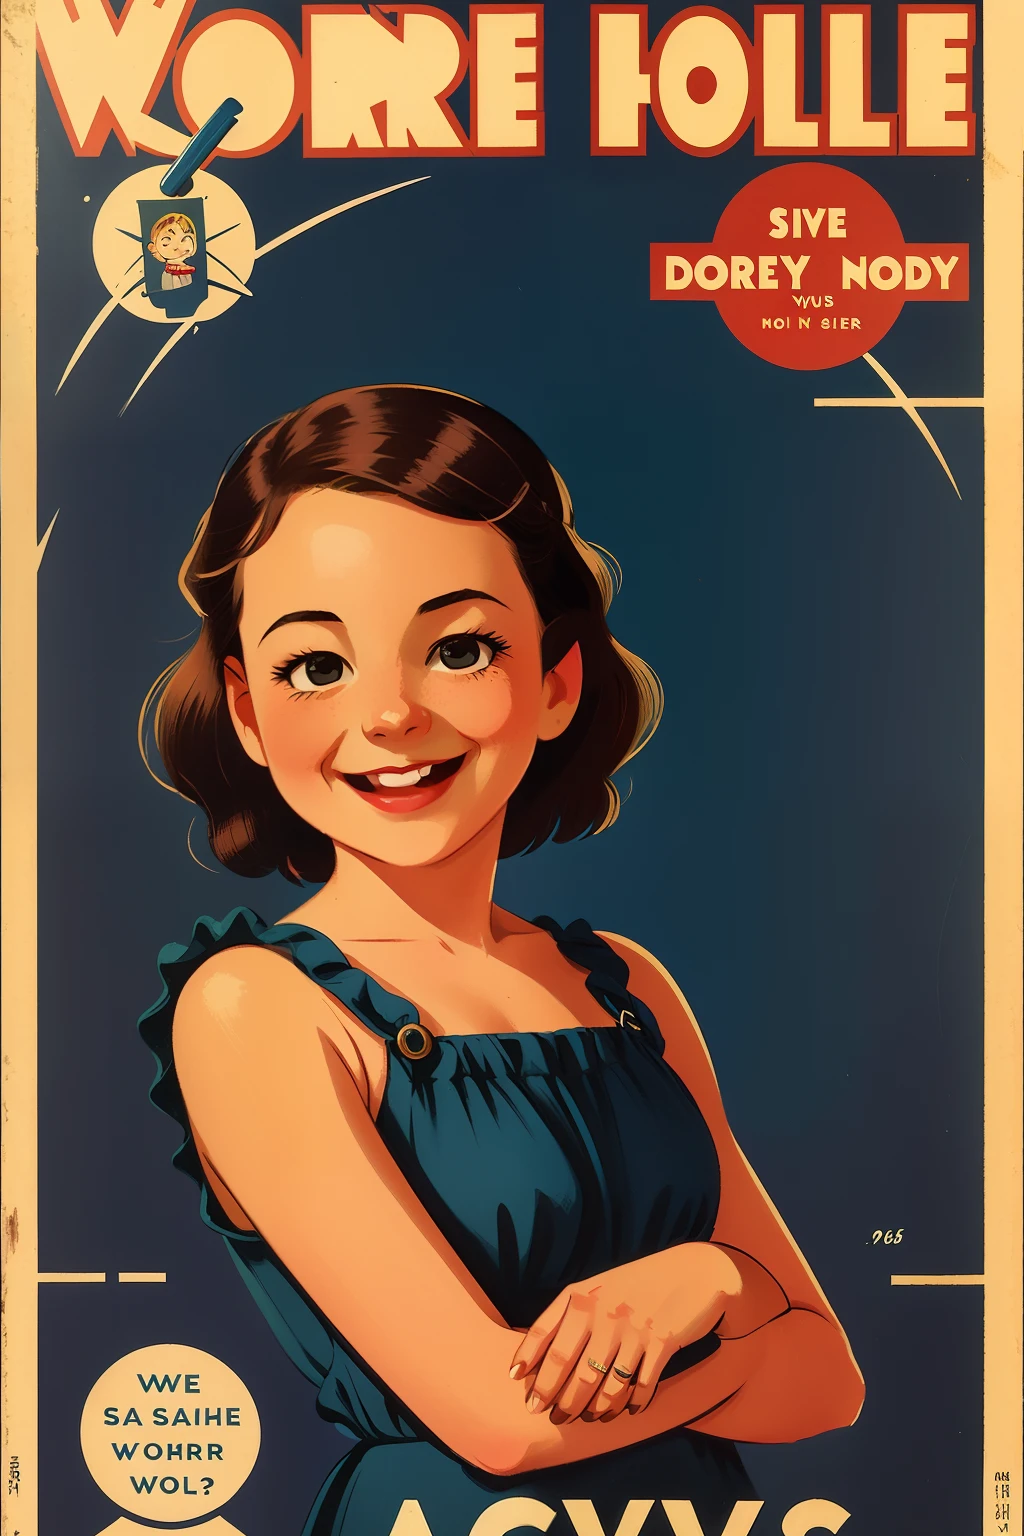 a close up of a poster of a young girl with a smile, glossy old advertising poster, vintage poster, poster vintage, retro poster, enoch bolles, 1940s propaganda poster, by Joseph Brandt, inspired by Art Frahm, beautiful retro art, art deco poster, vintage poster style, retro ad, the front of a trading card